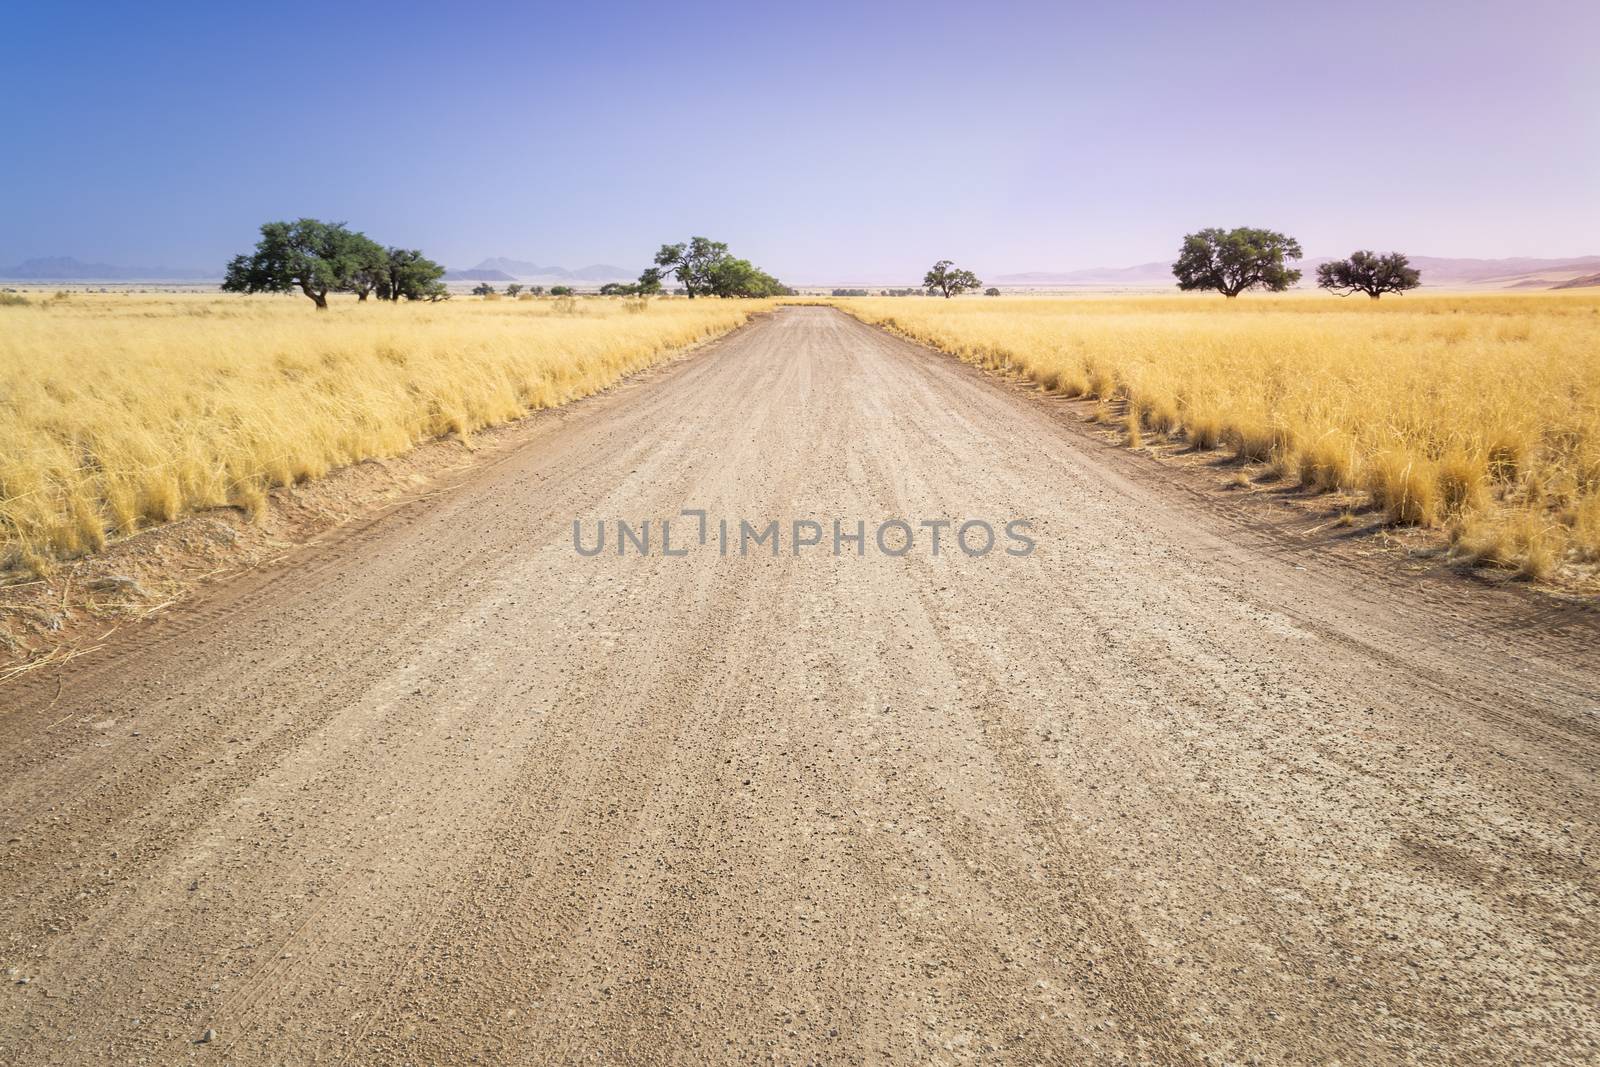 Grass-lined Namibian savanna gravel road near Sossusvlei, Namibia, during travel and self drive road trip in Africa. Showing horizon, infinity point and dramatic golden hour